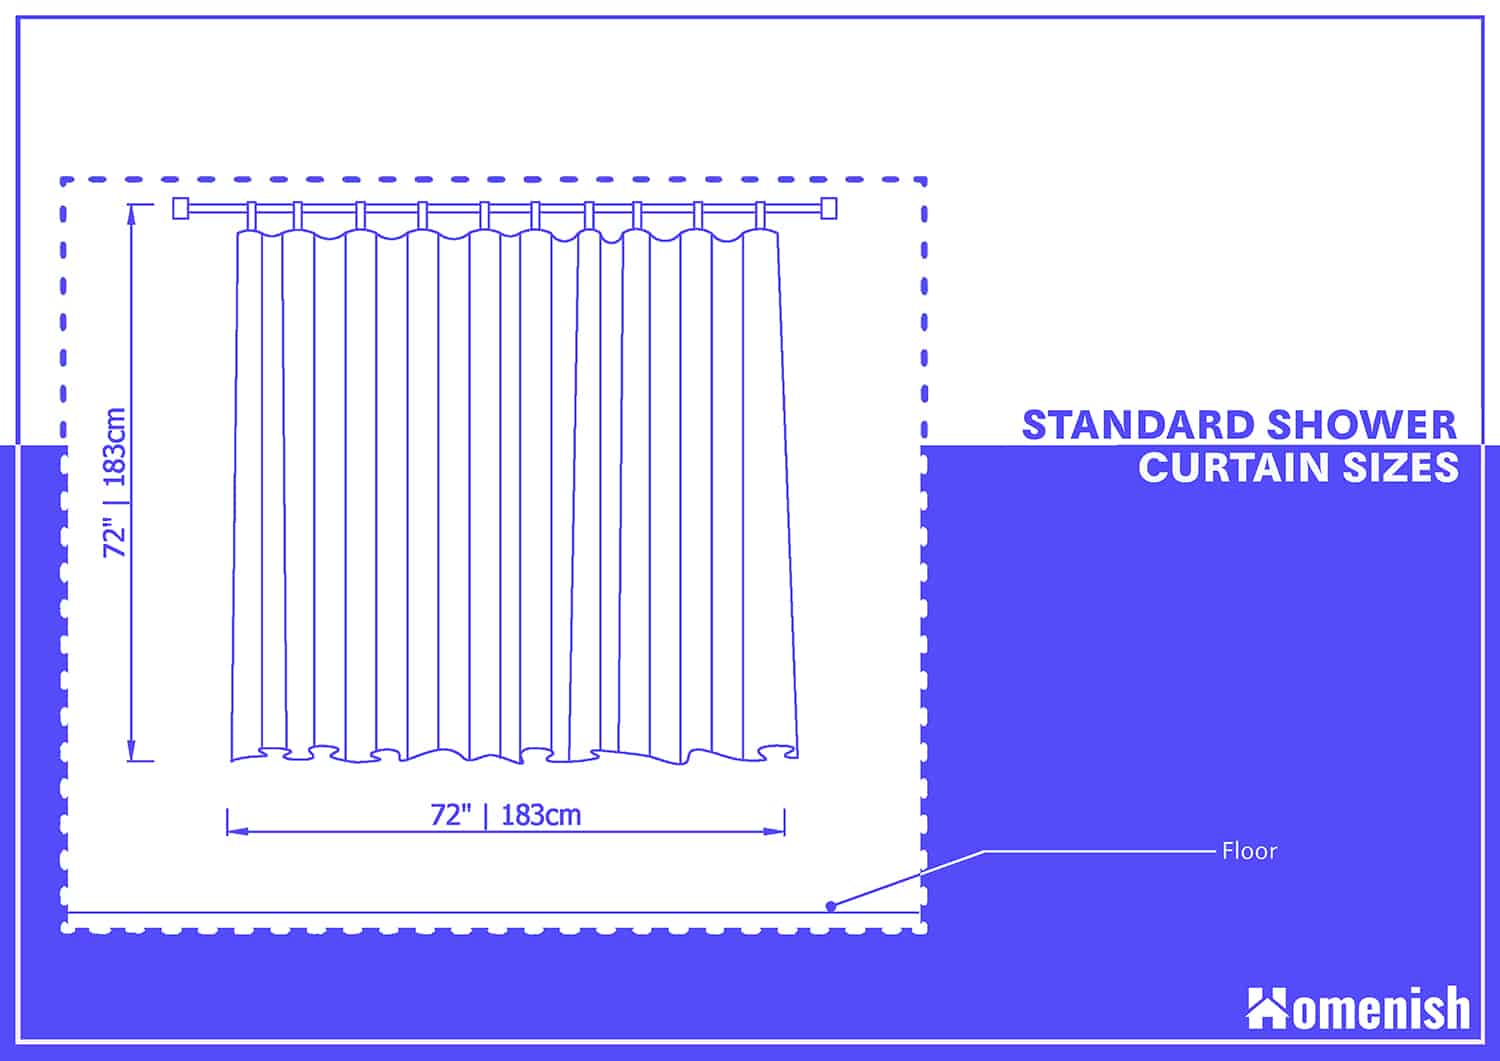 Standard Shower Curtain Size, Are There Shower Curtains Longer Than 72cm